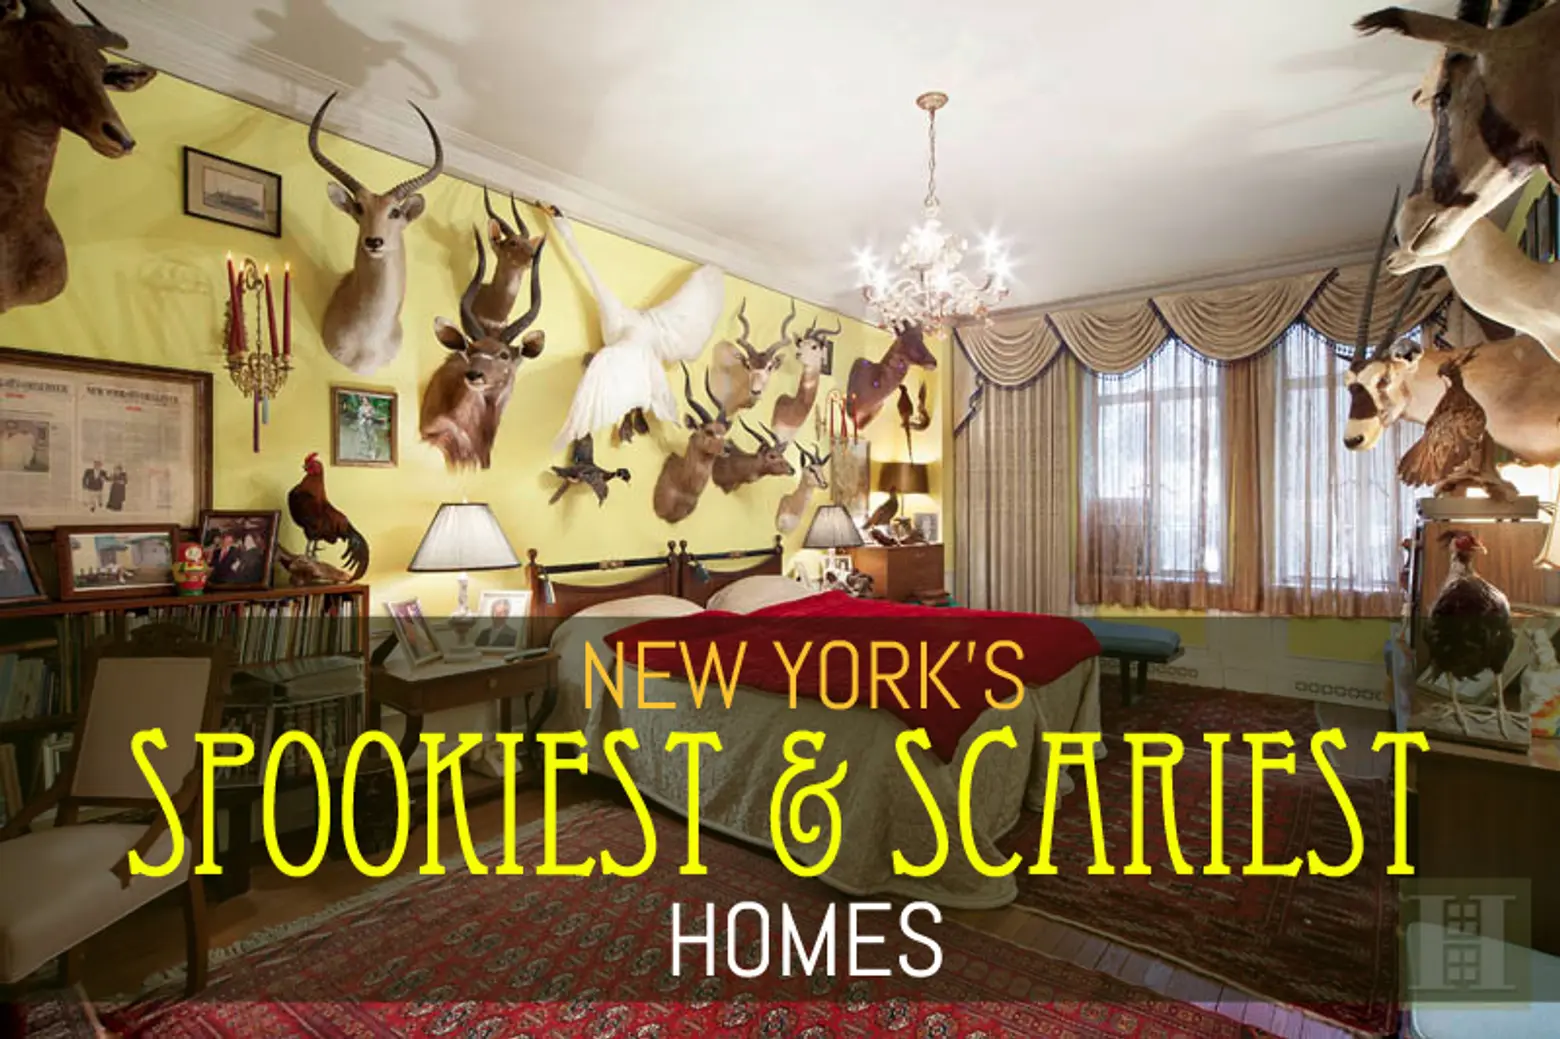 <b>6 of New York’s Spookiest, Scariest and Downright Strangest Homes</b>